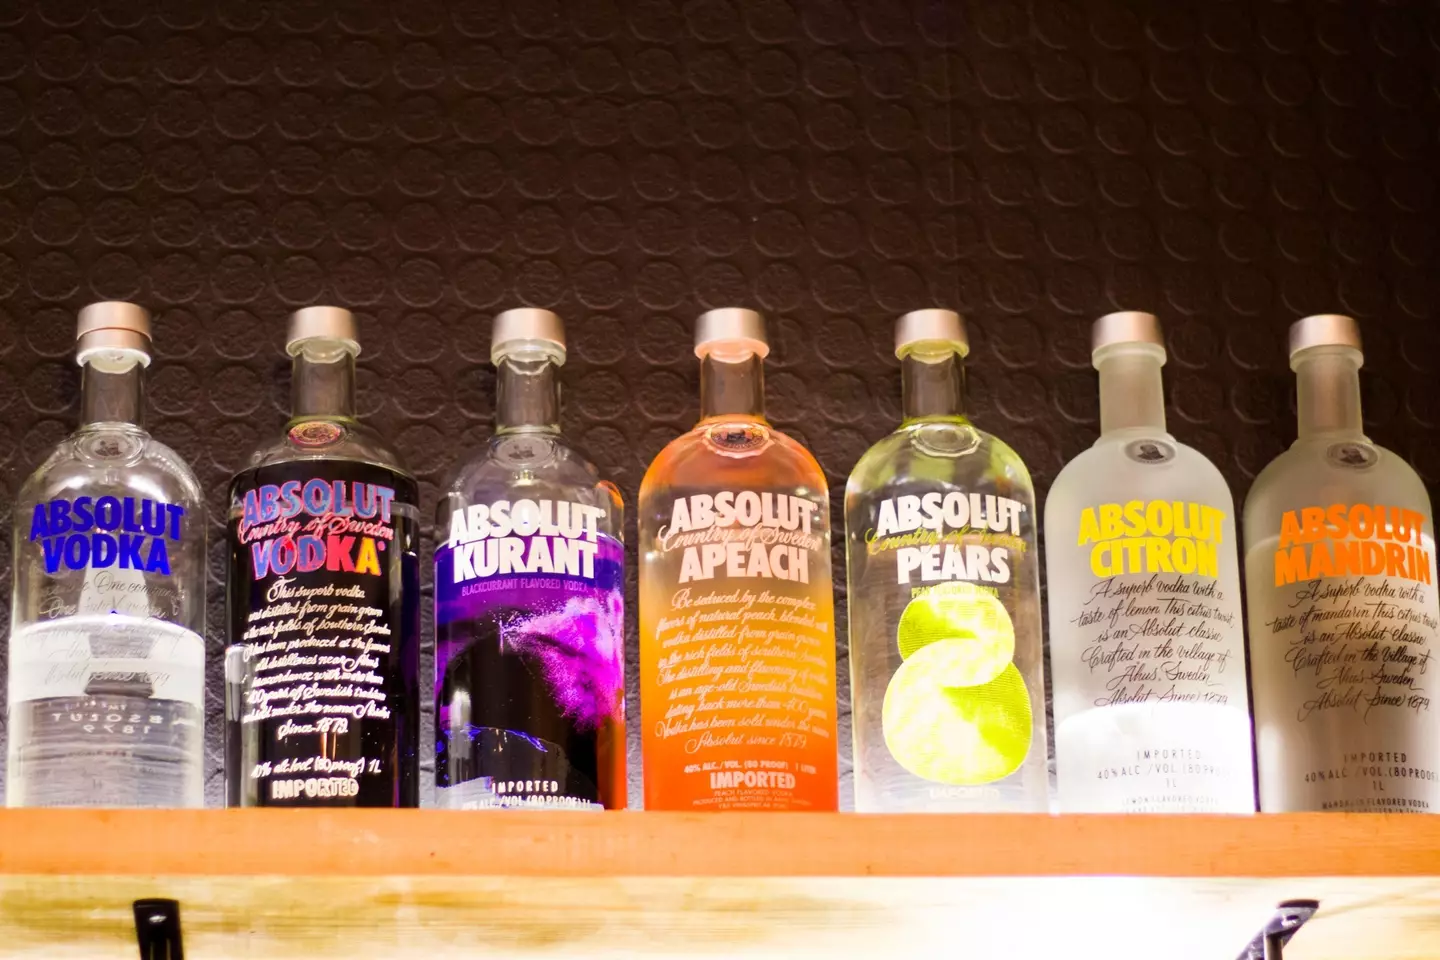 Why some bottles of Absolut are spelled correctly and others aren't really is a big mystery.